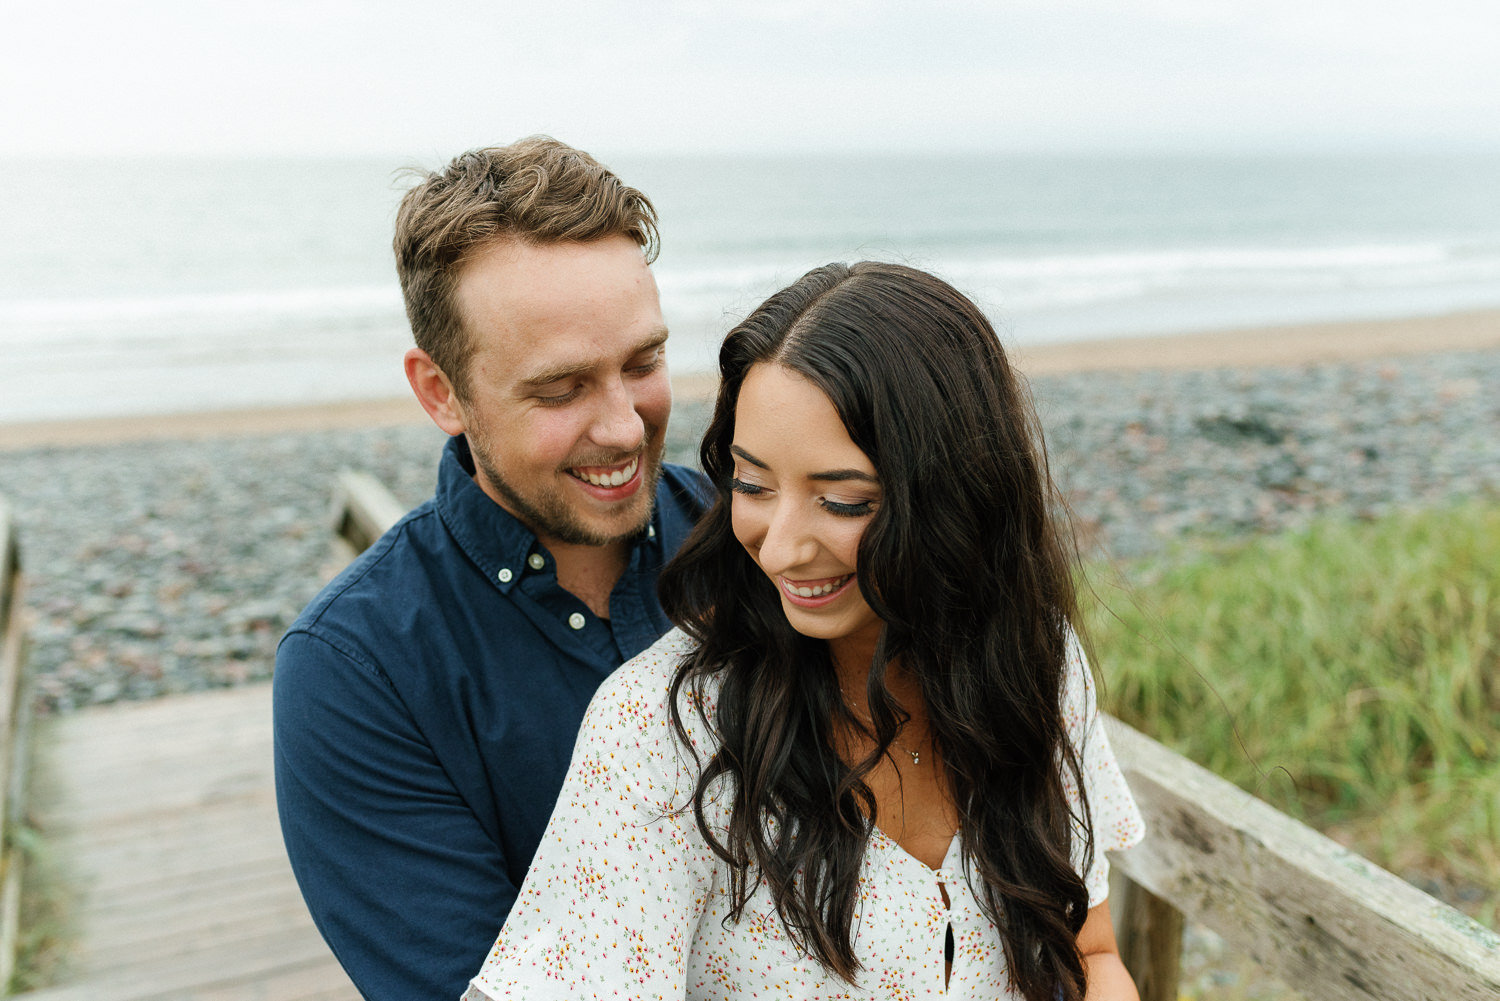 engagement session at Lawrencetown beach